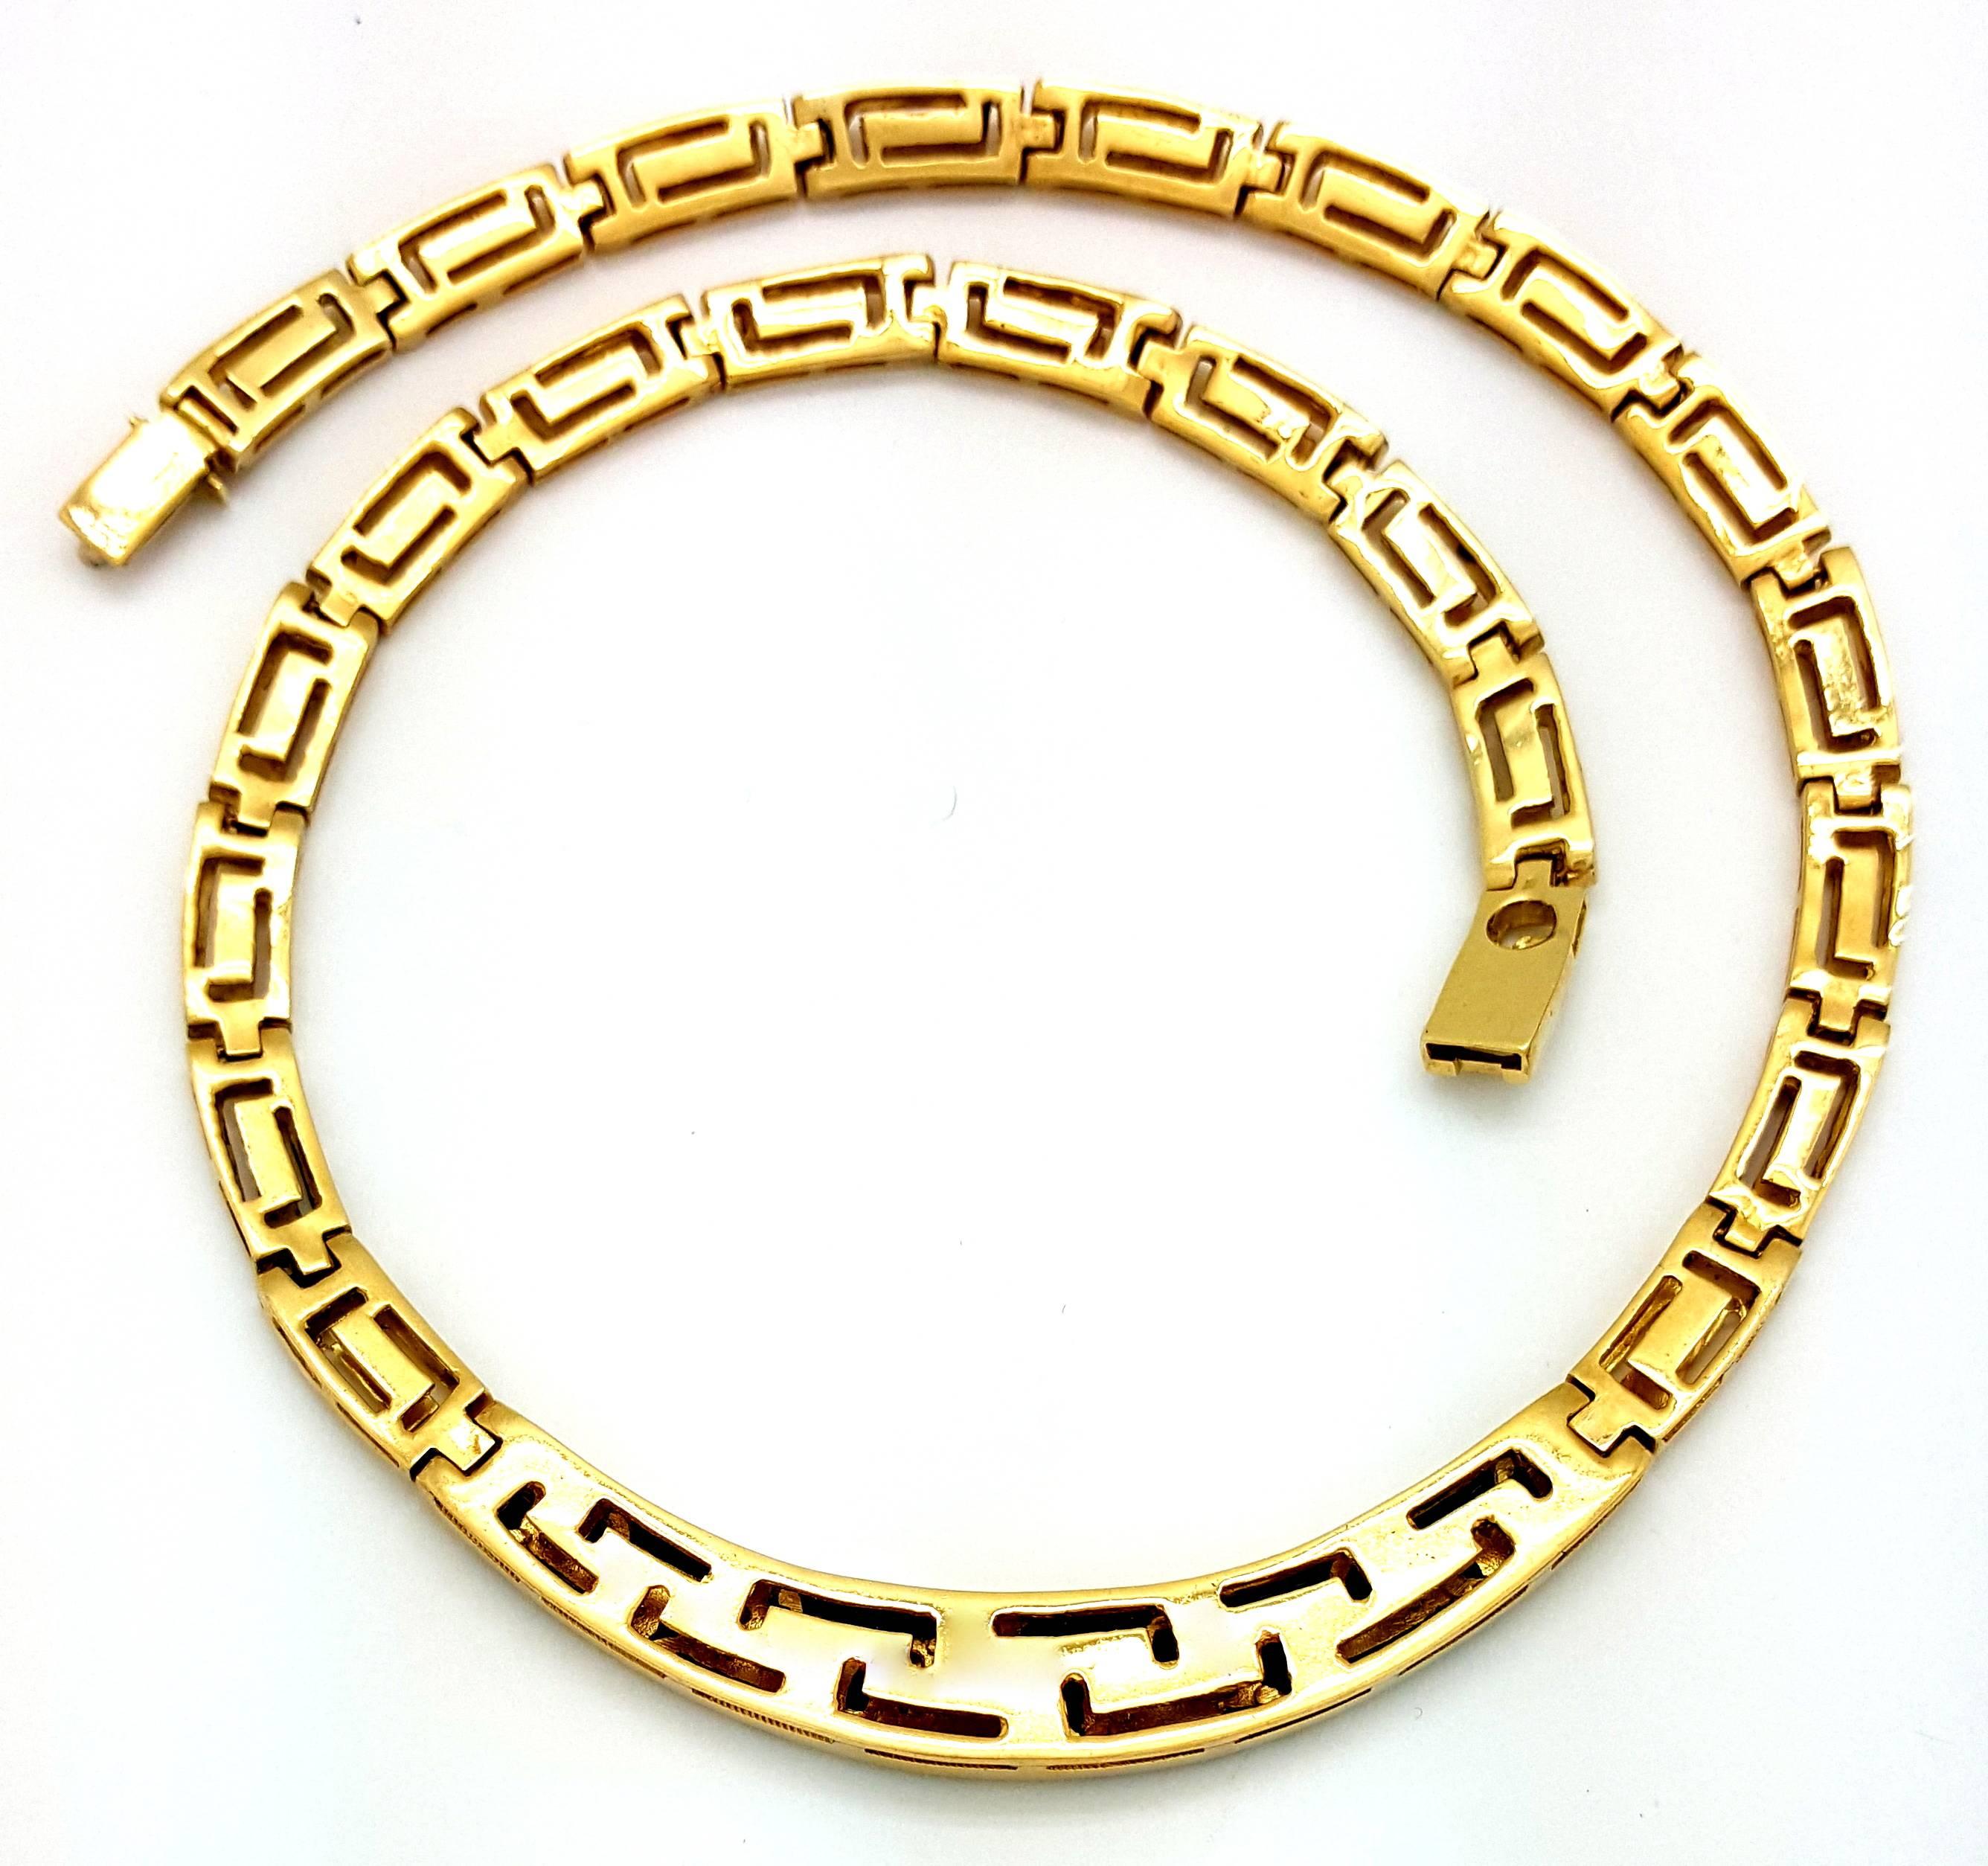 Sapphire Diamond Gold Greek Key Collar Necklace In Excellent Condition For Sale In Scottsdale, AZ